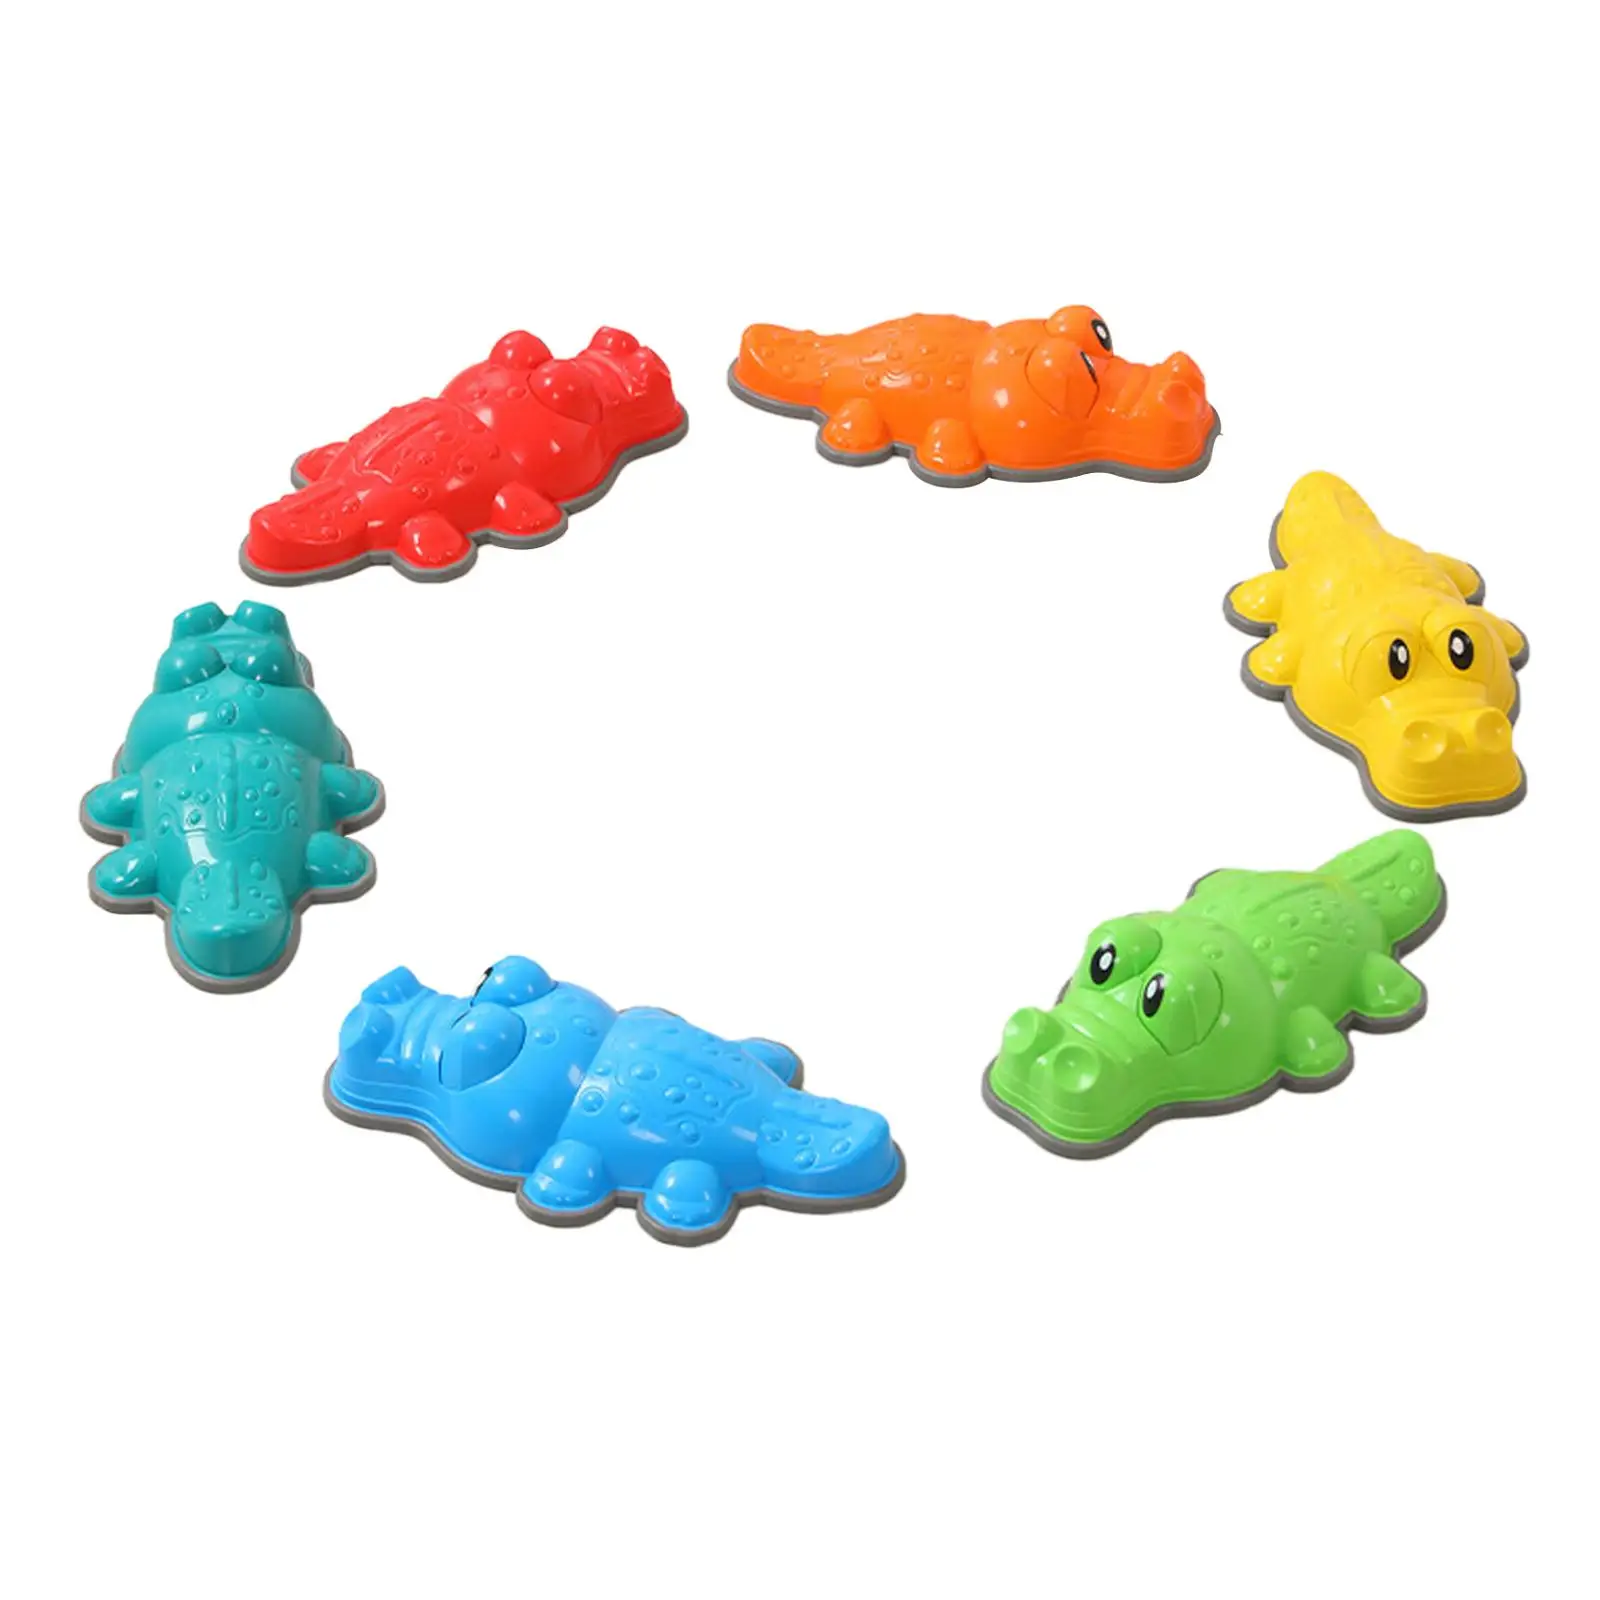 Stepping Stone Stacking Stones Crossing River Stone for Boys Toddlers Girls